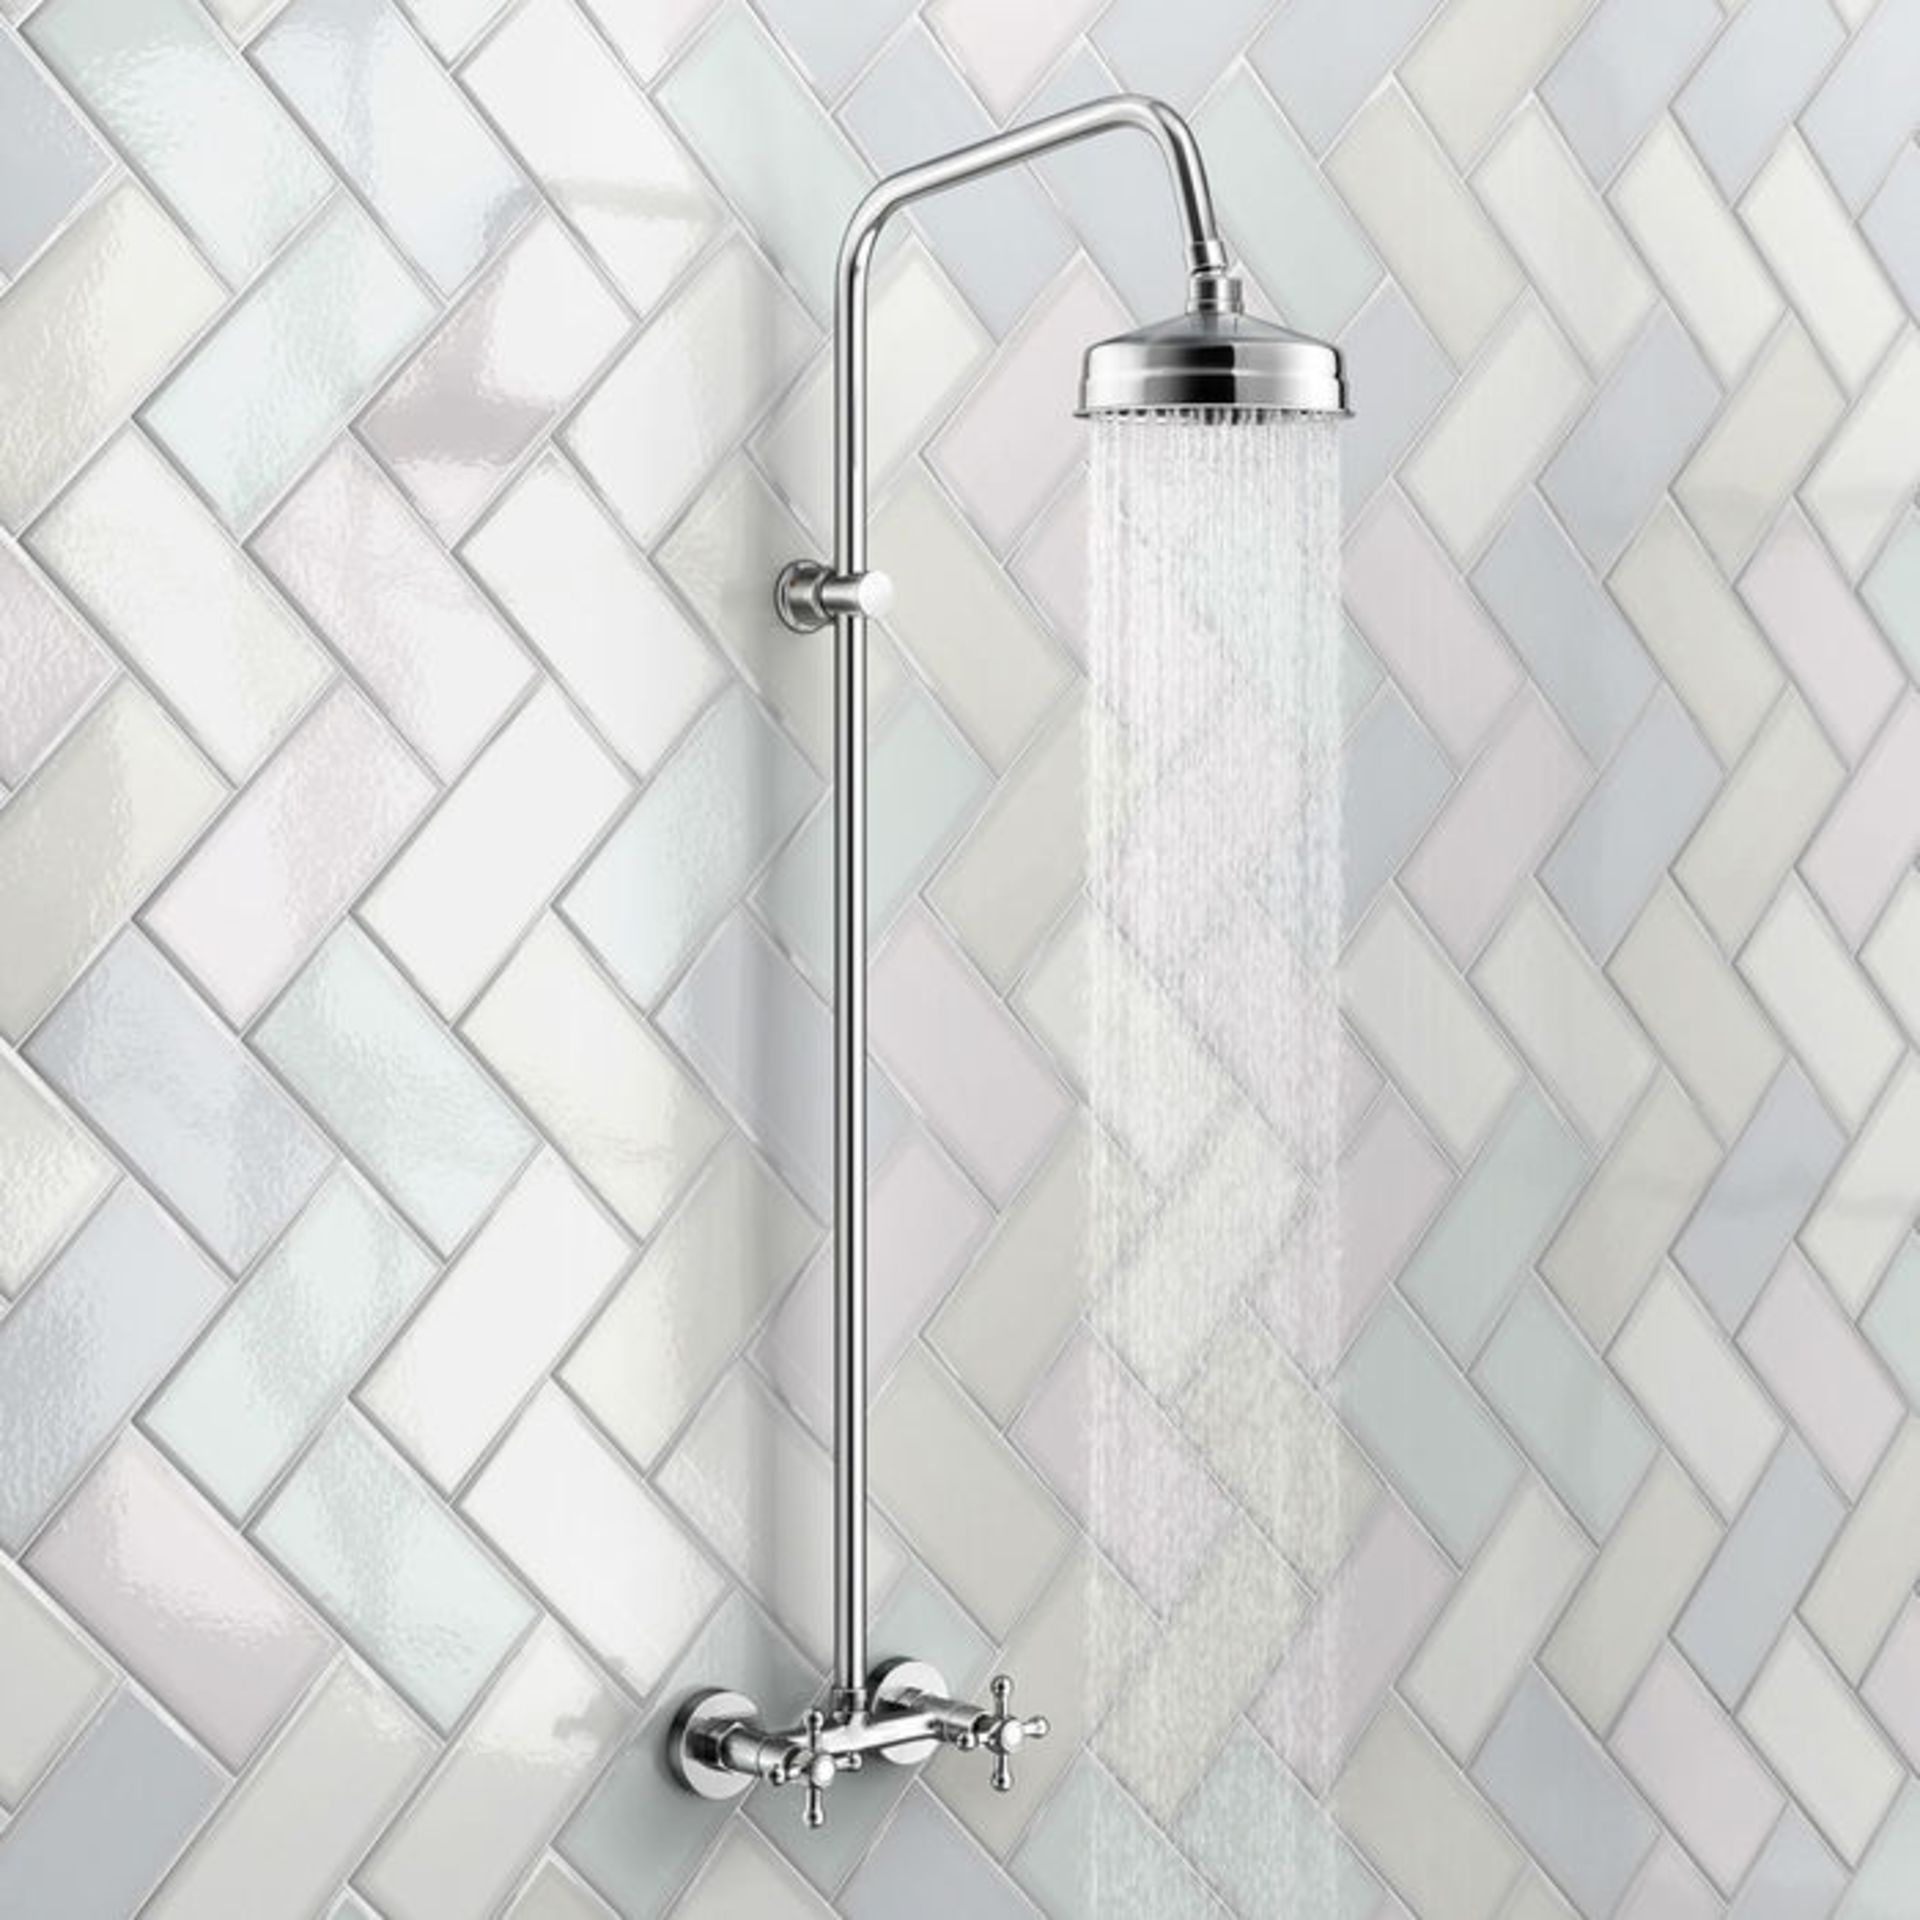 (ZL31) Traditional Exposed Shower & Medium Head. Exposed design makes for a statement piece Stunning